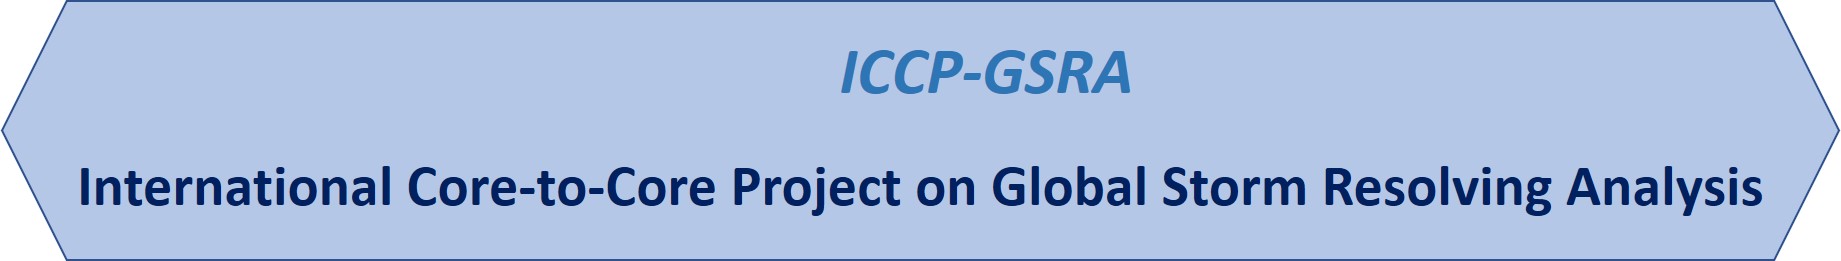 ICCP-GSRA: International Core-to-Core Project on Global Storm Resolving Analysis